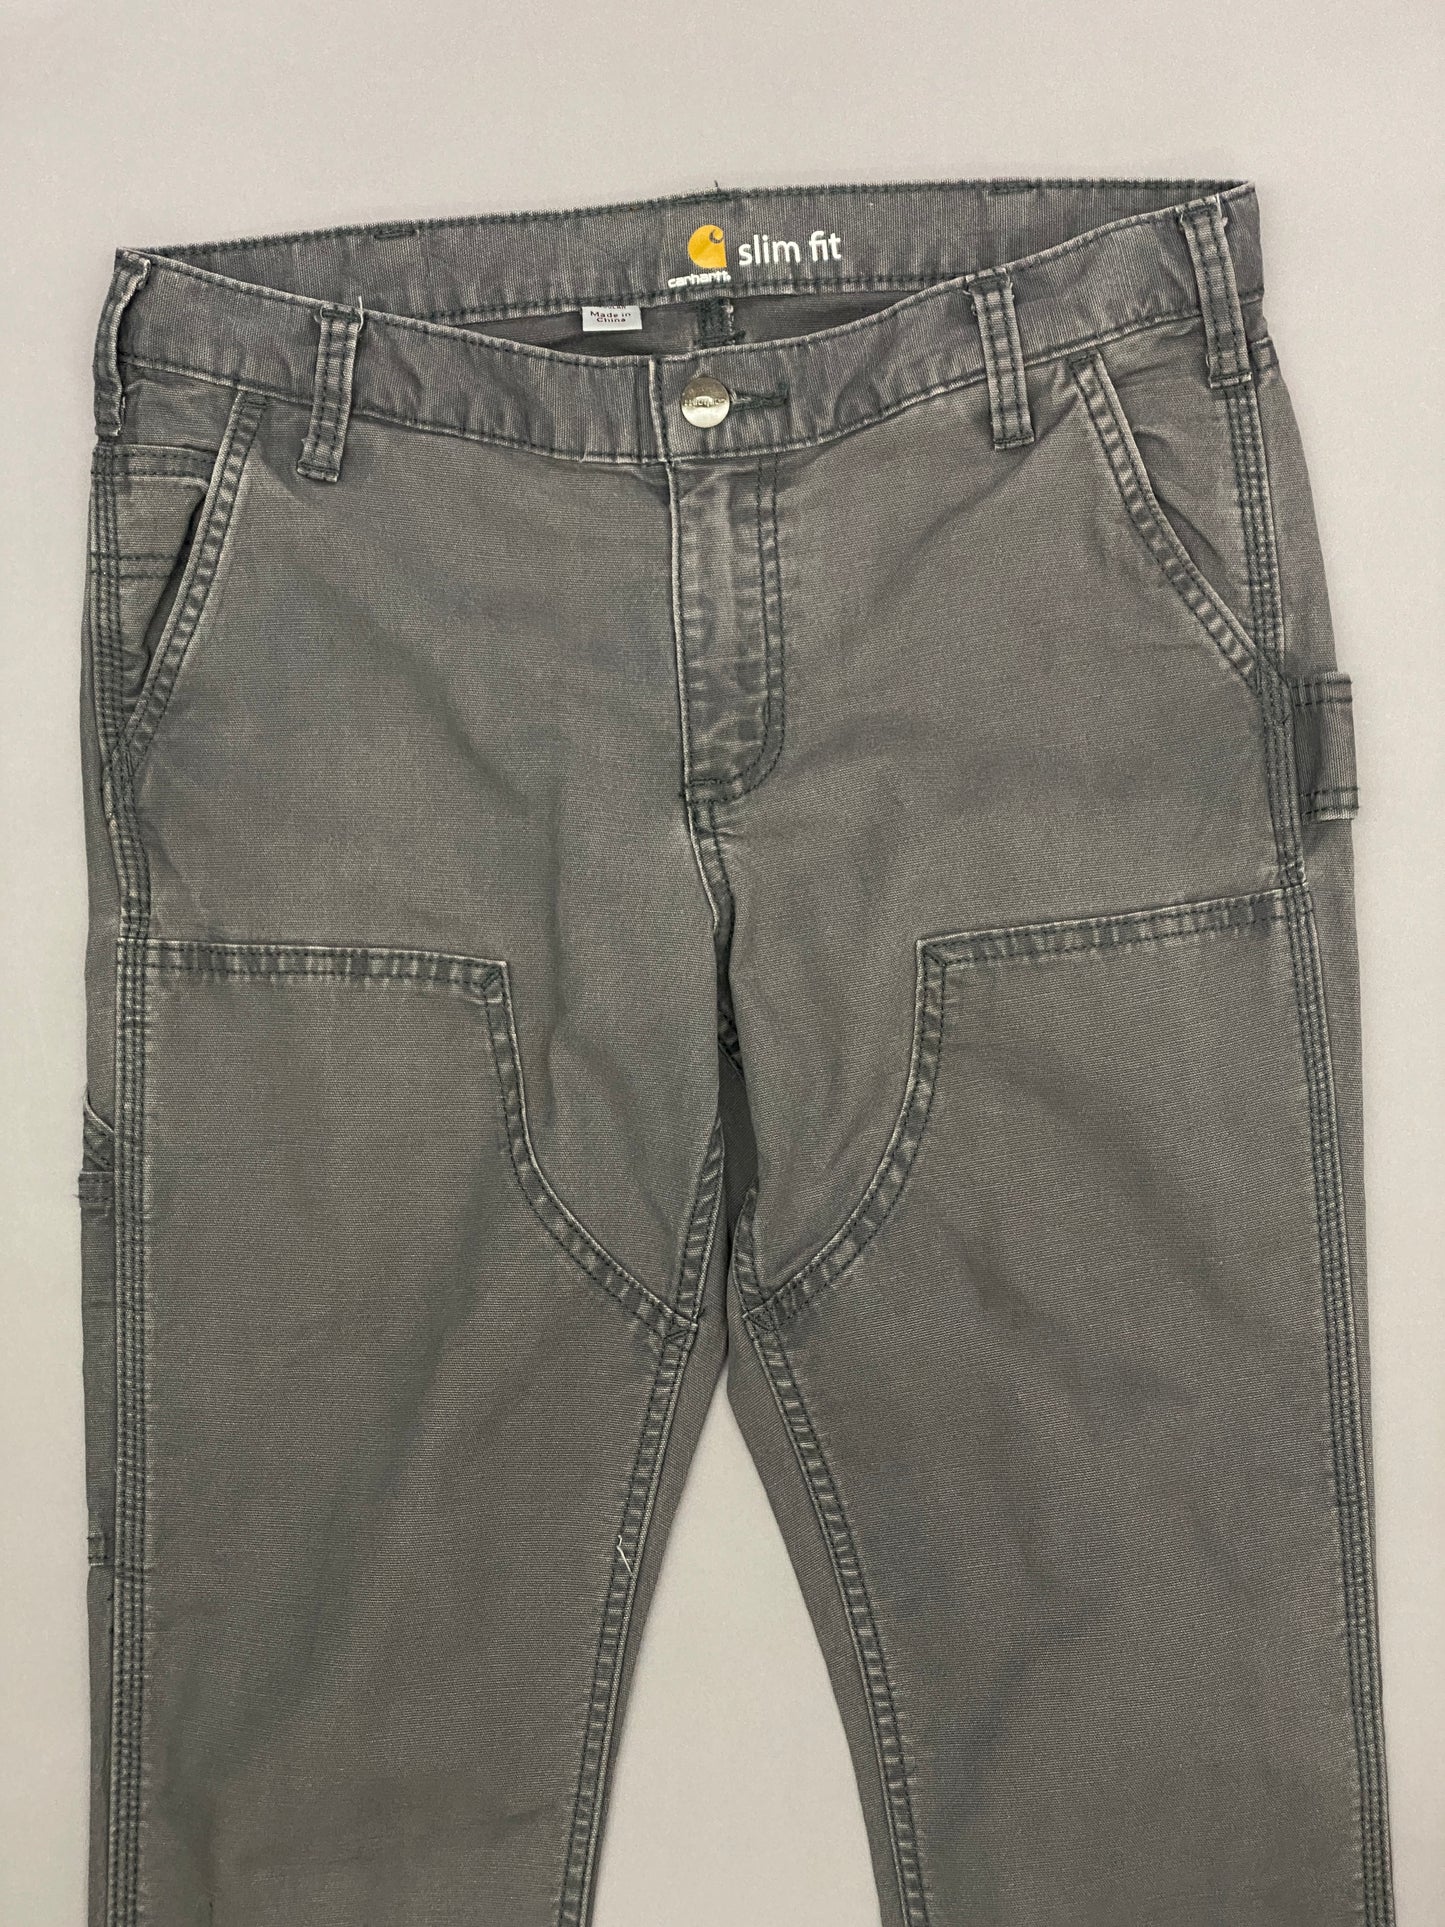 Double Knee Carhartt Jeans - W6 or 31